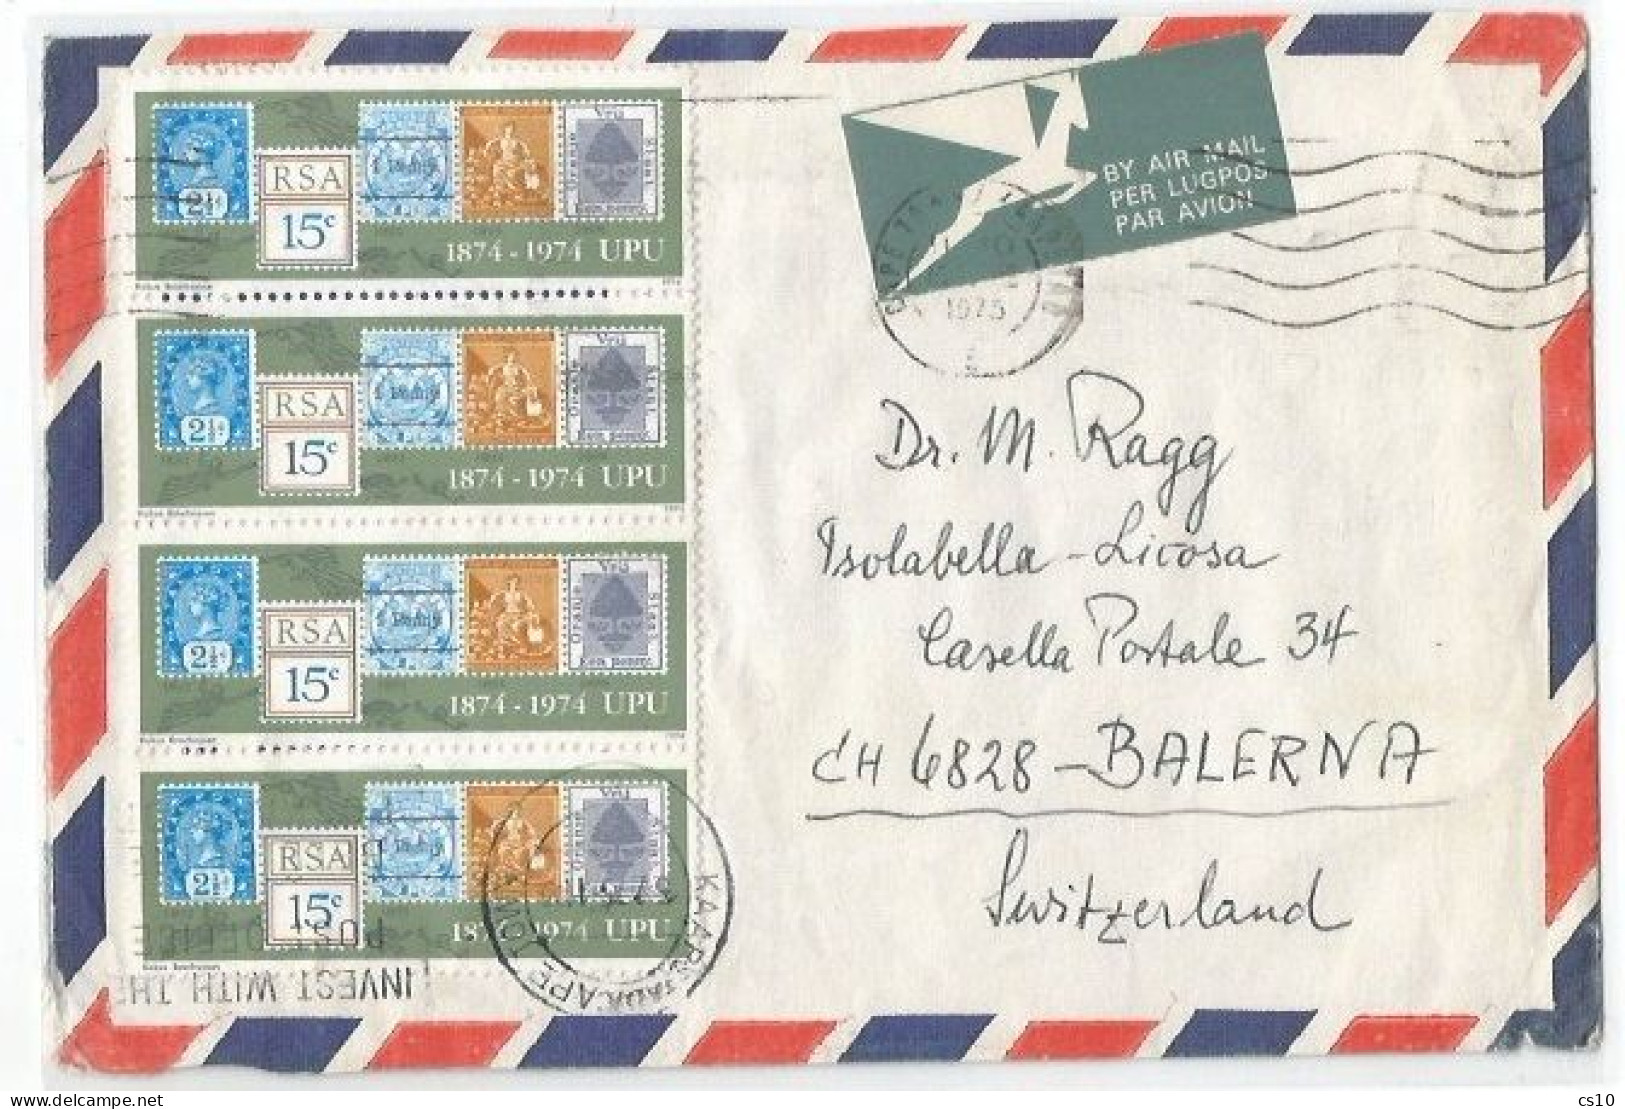 South Africa AirmailCV Capetown15feb1975 X Suisse With Strip4 UPU C.15 = Rate C.60 - Lettres & Documents